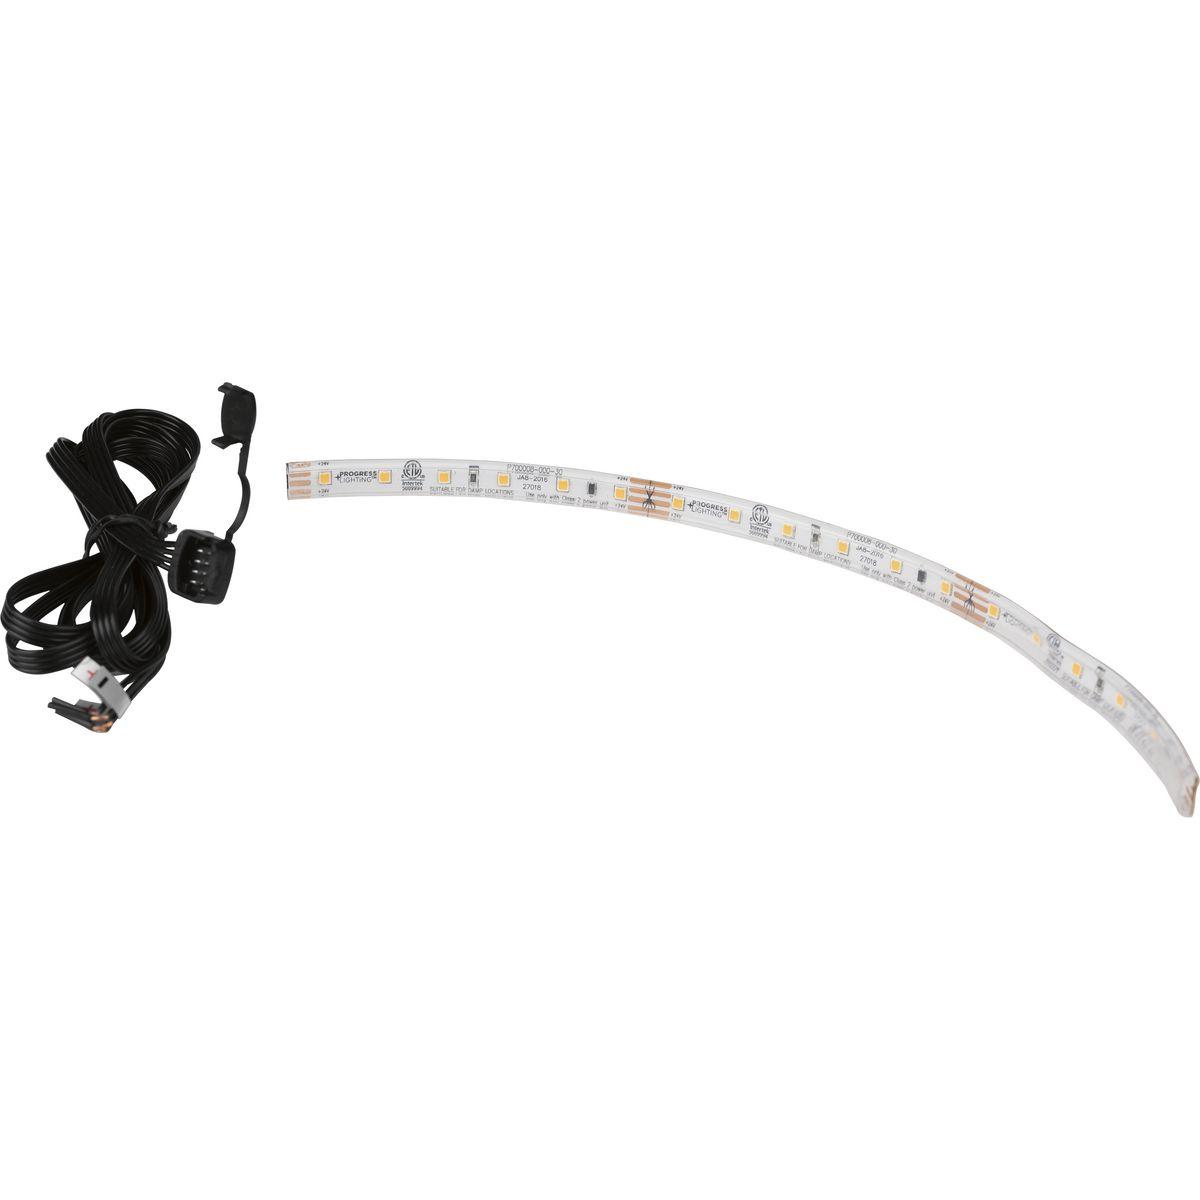 Hubbell P700008-000-27 LED Tape provides lighting to enhance aesthetics while also aiding in tasks around the home. Common applications for LED tape include undercabinet lighting in kitchens to add illumination to work surfaces, highlighting back splashes in kitchens and bathro